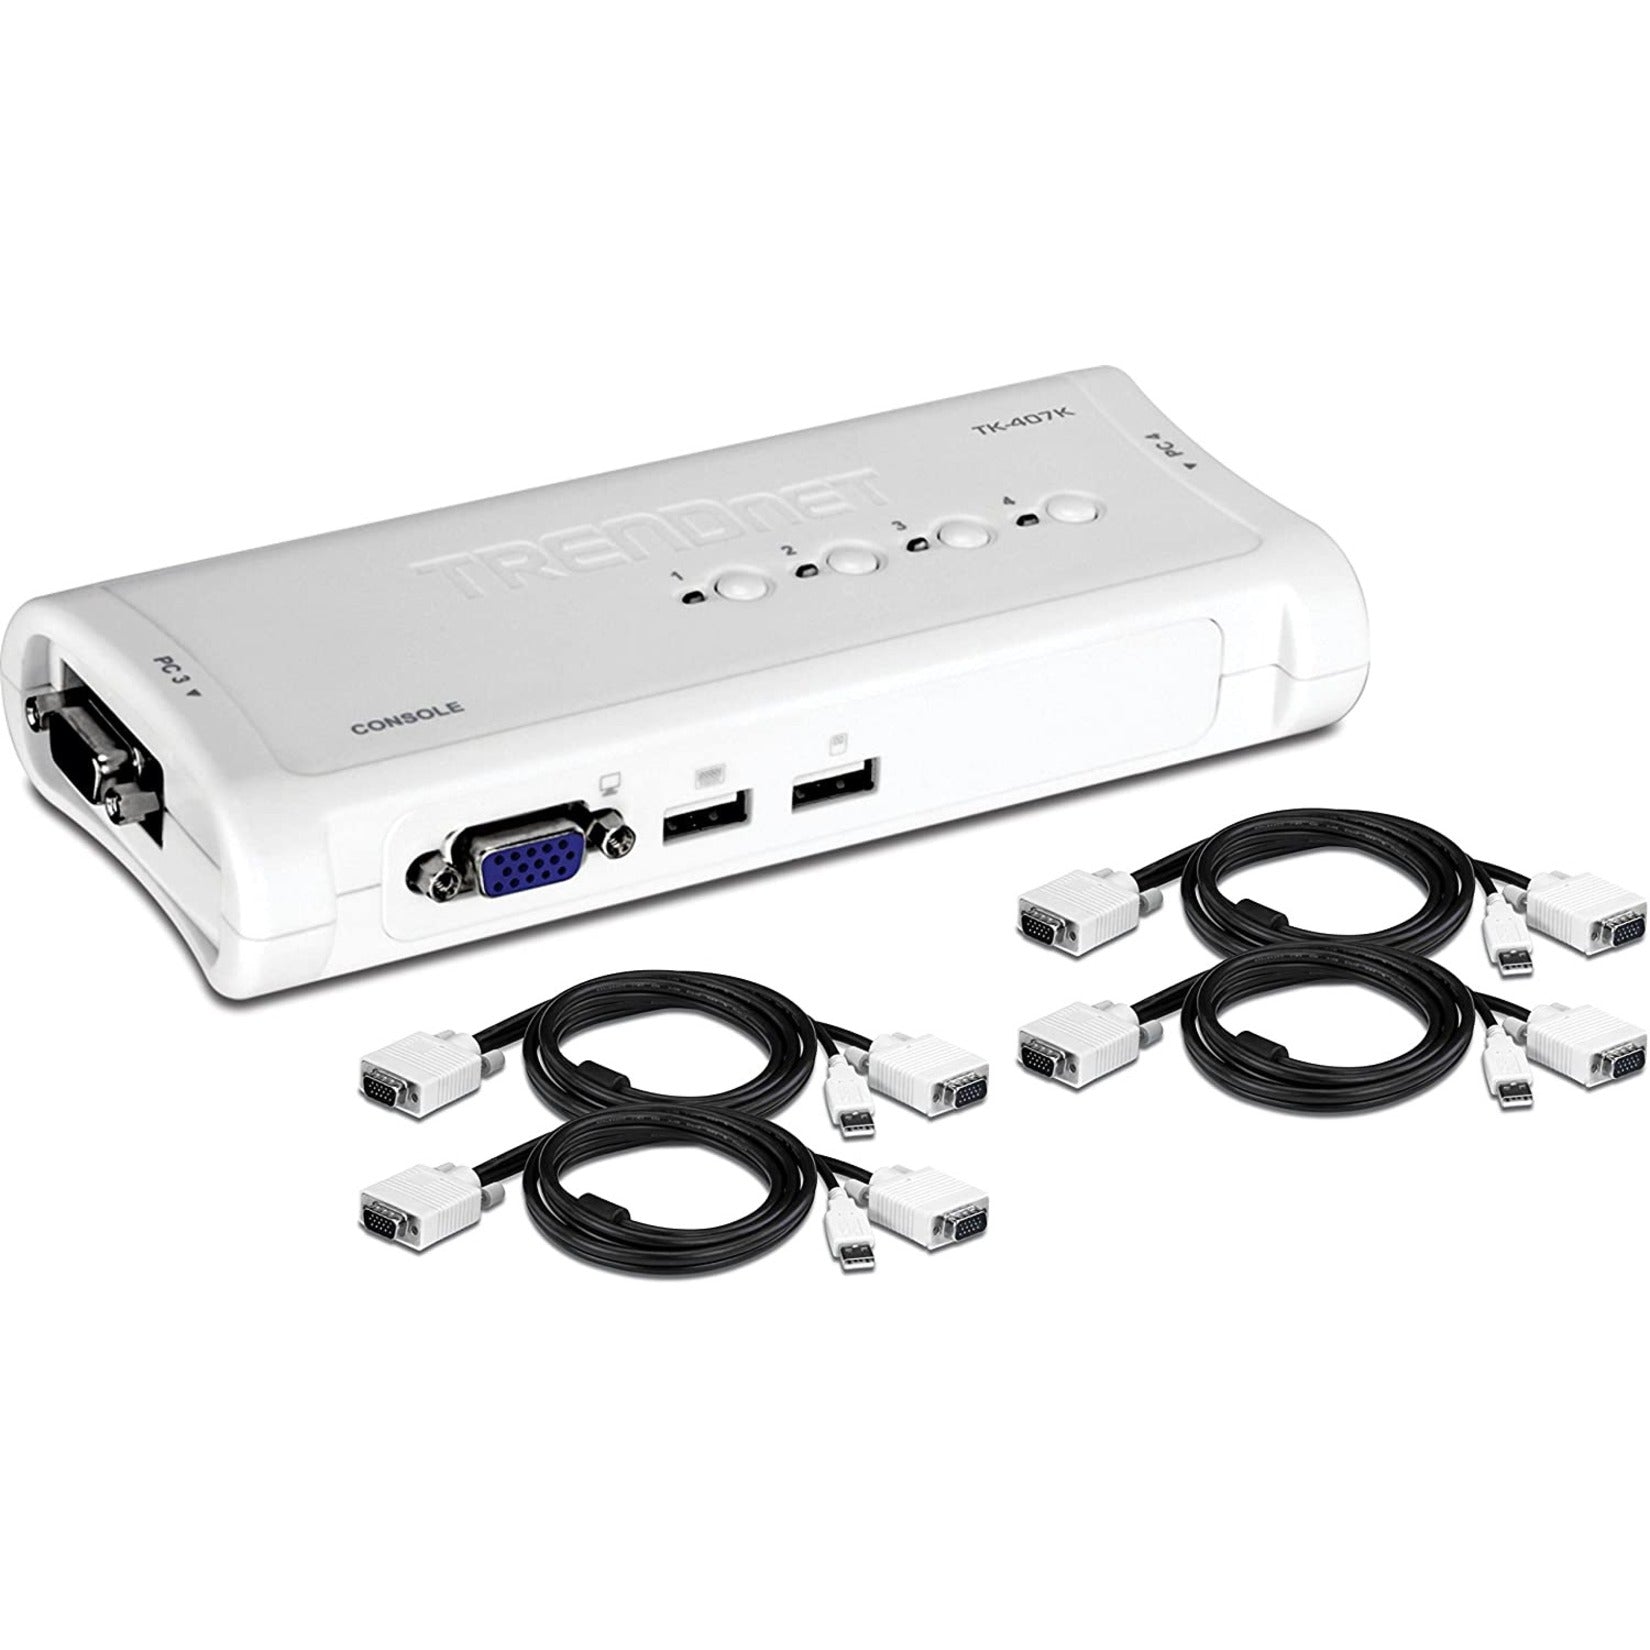 TRENDnet 4-Port USB KVM Switch Kit, VGA And USB Connections, 2048 x 1536 Resolution, Cabling Included, Control Up To 4 Computers, Compliant With Window, Linux, and Mac OS, White, TK-407K (TK-407K) Main image